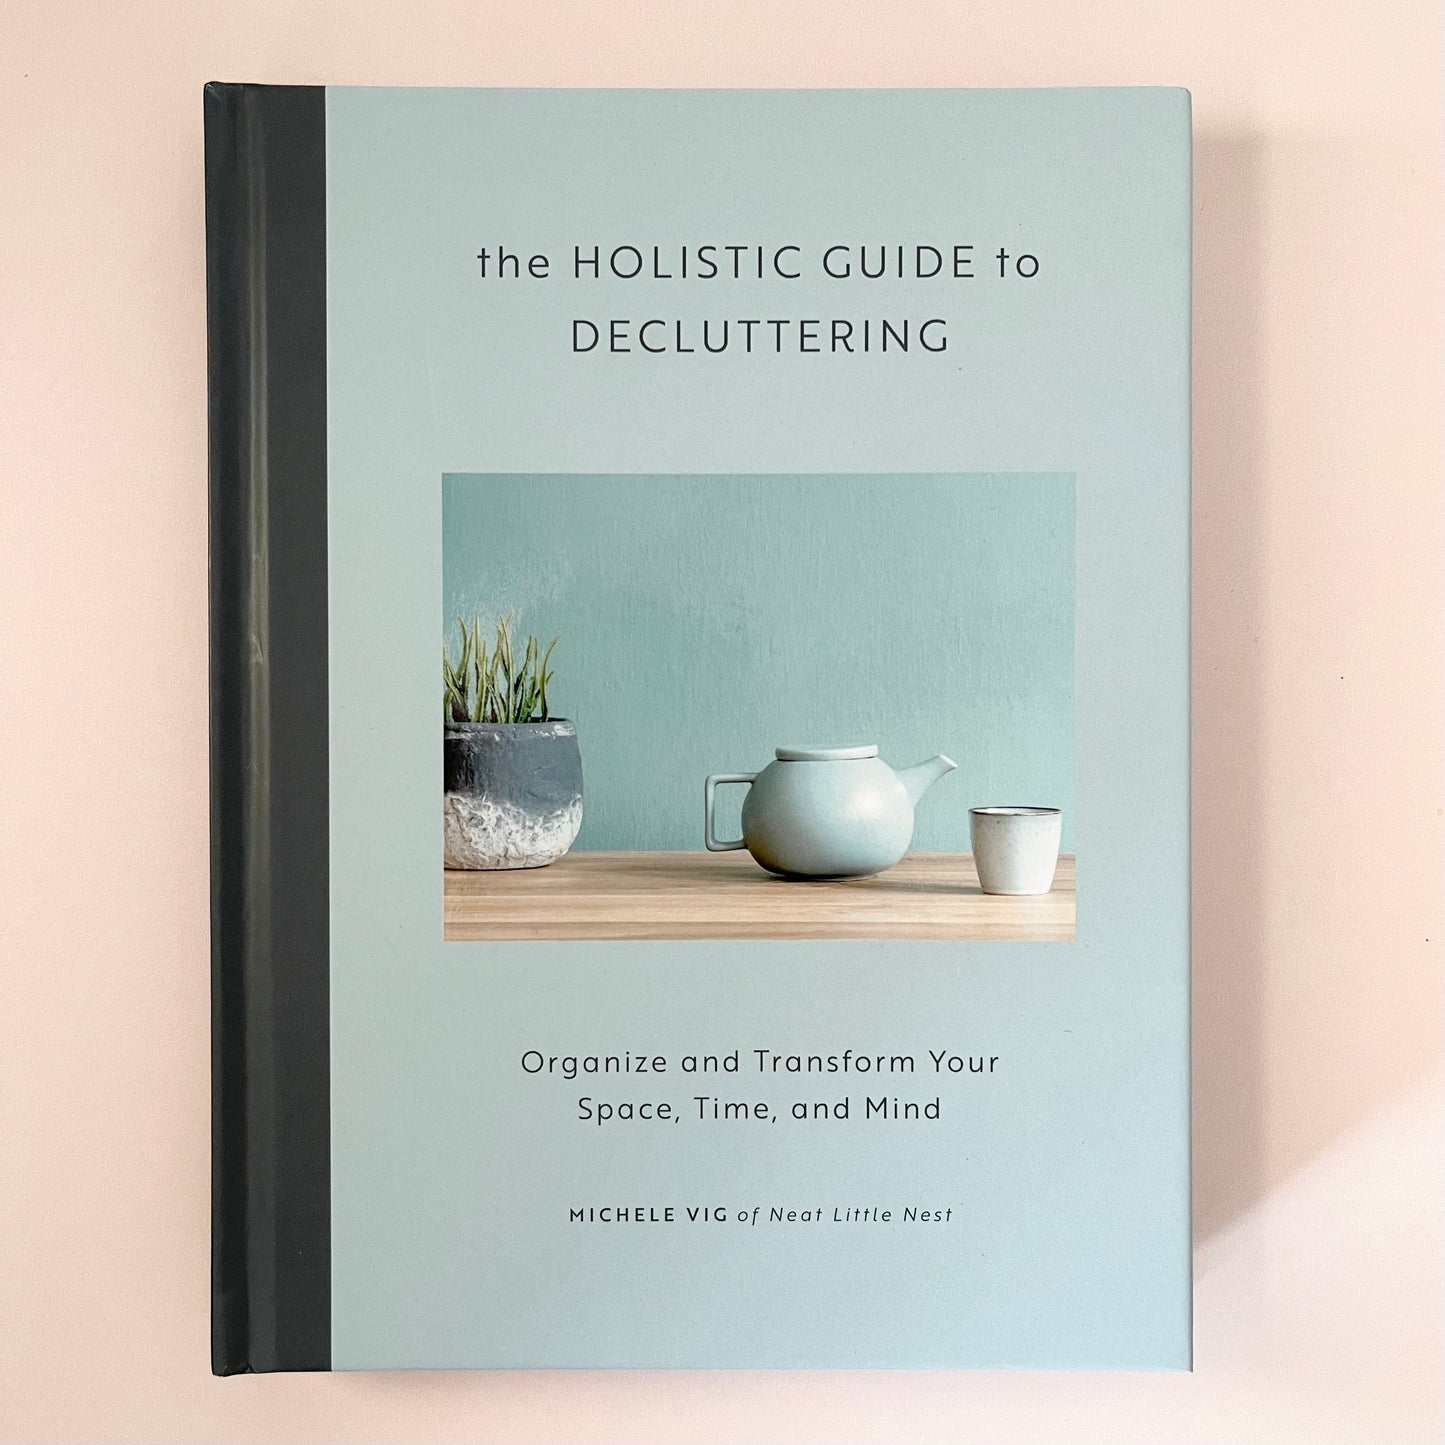 Holistic Guide to Decluttering by Michele Vig